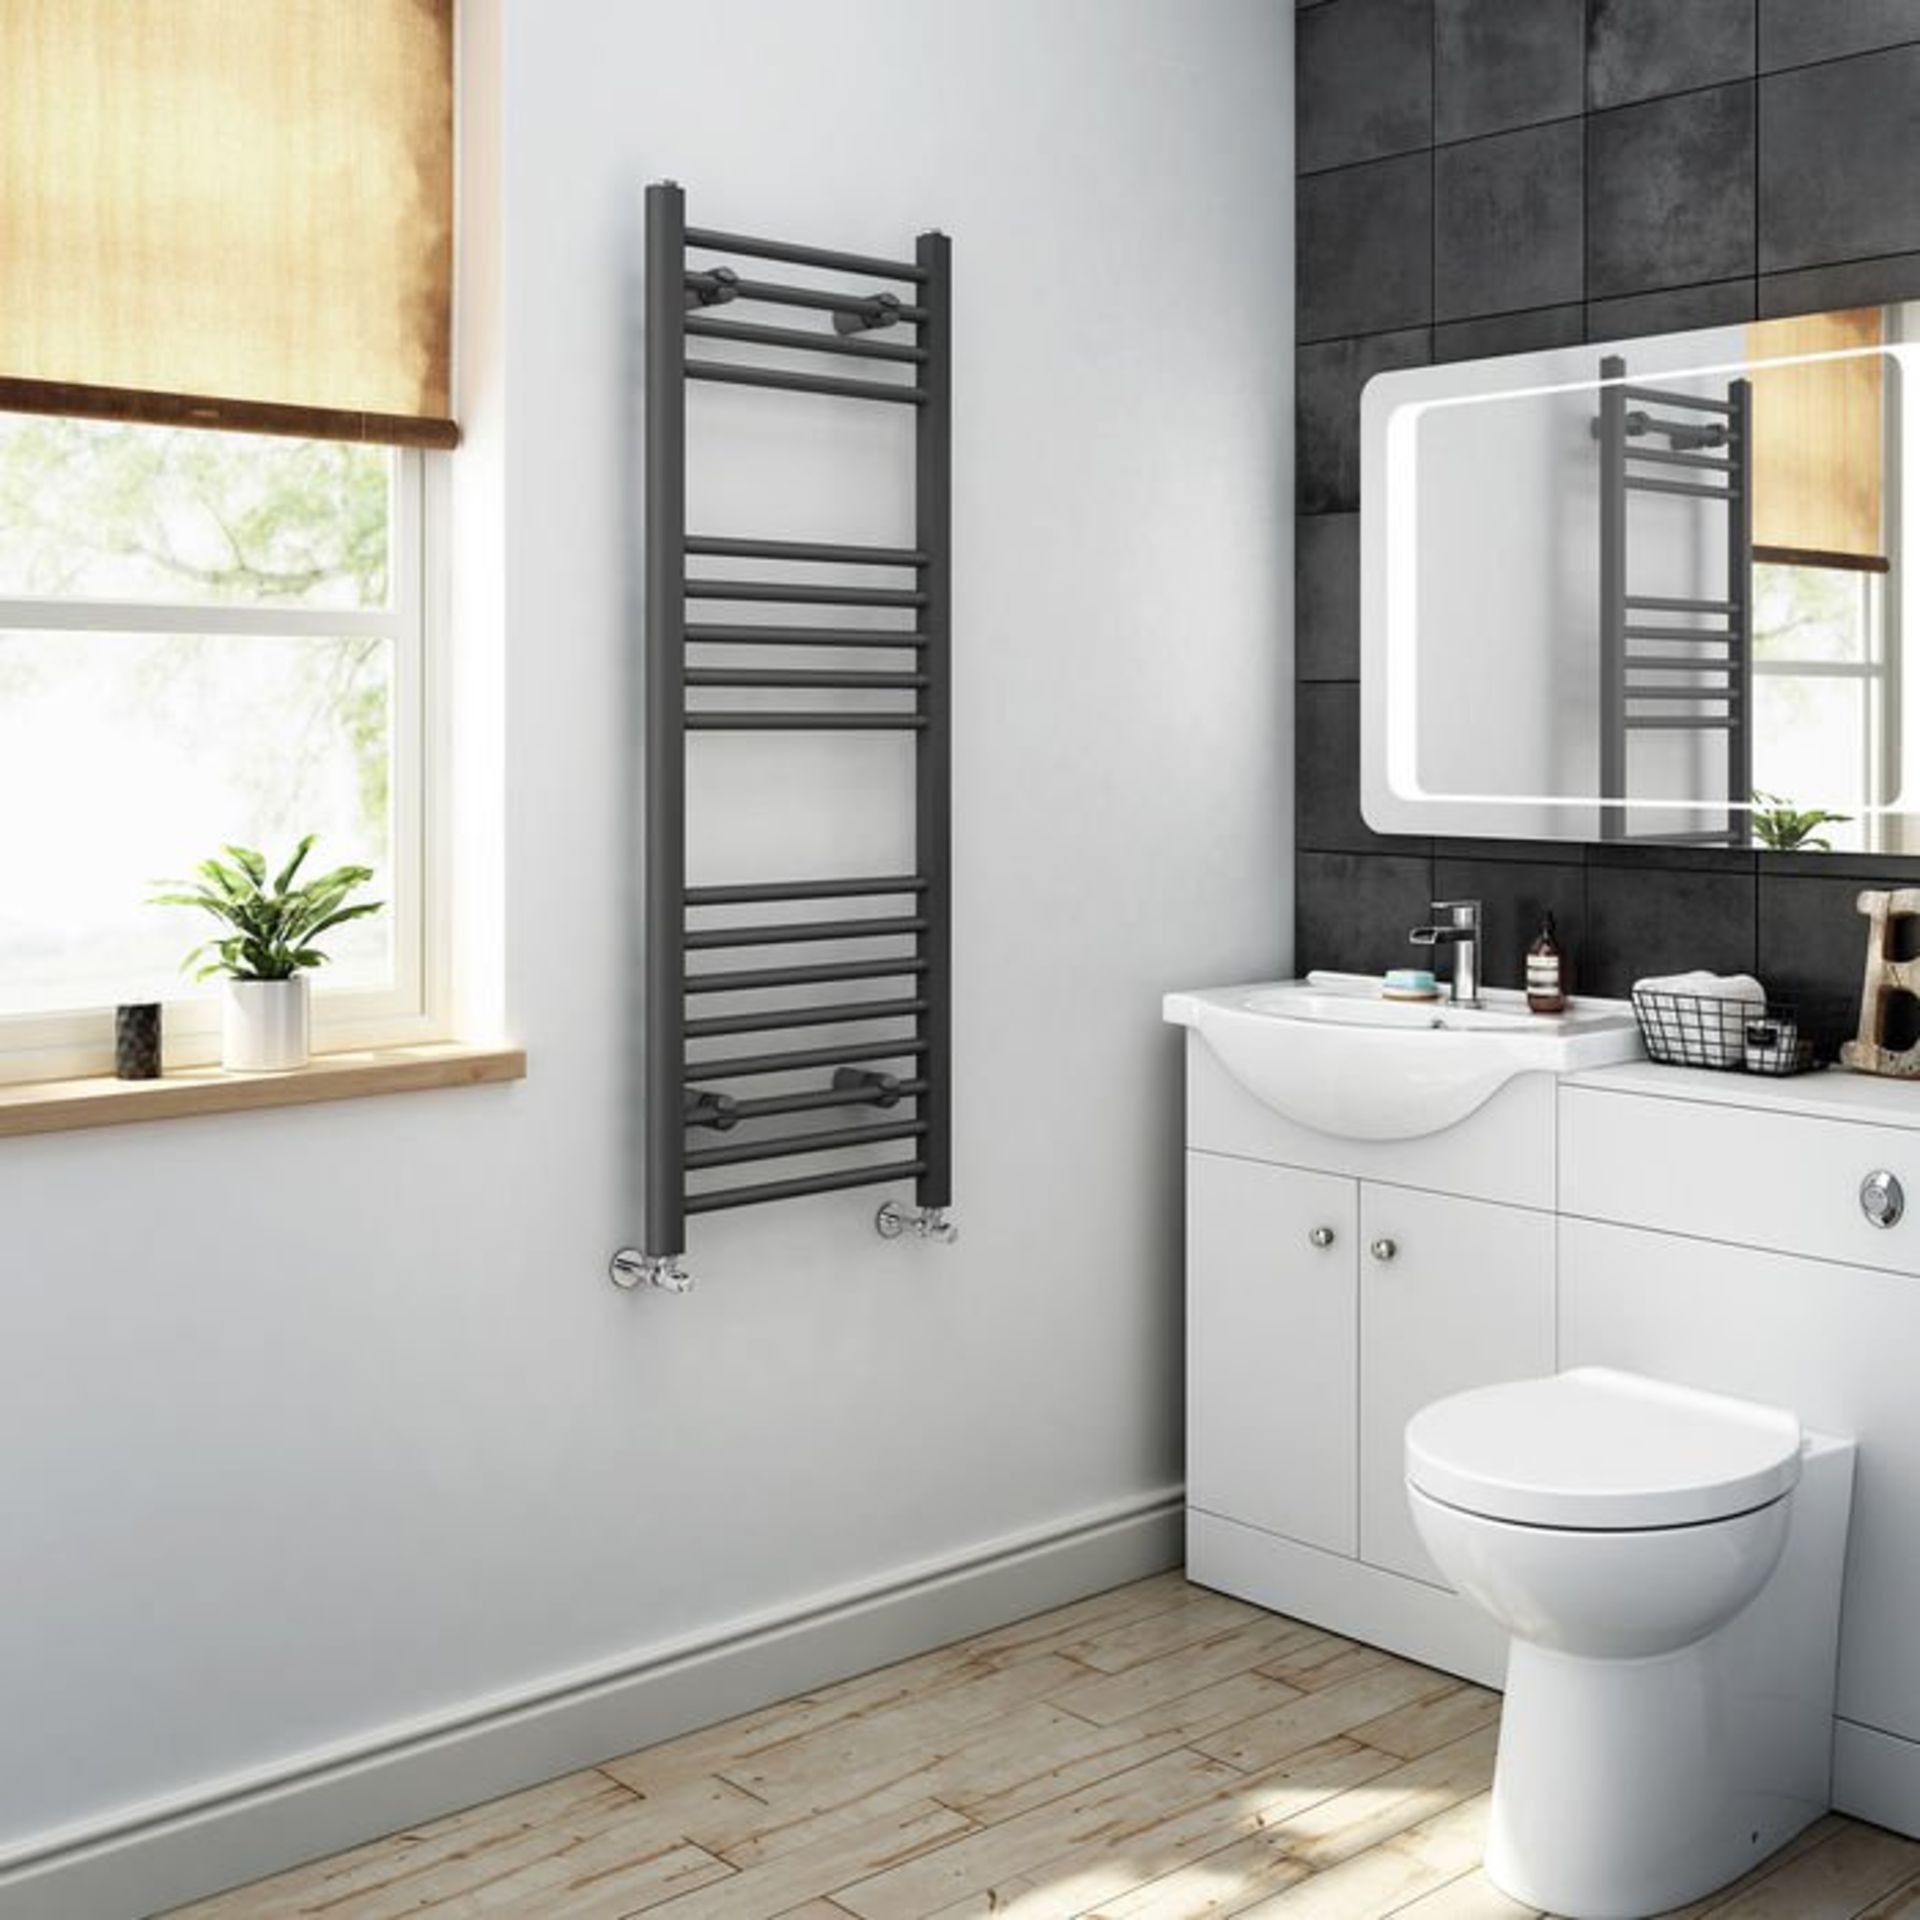 (S113) 1200x450mm - 20mm Tubes - Anthracite Heated Straight Rail Ladder Towel Radiator RRP £137.99 - Image 2 of 3